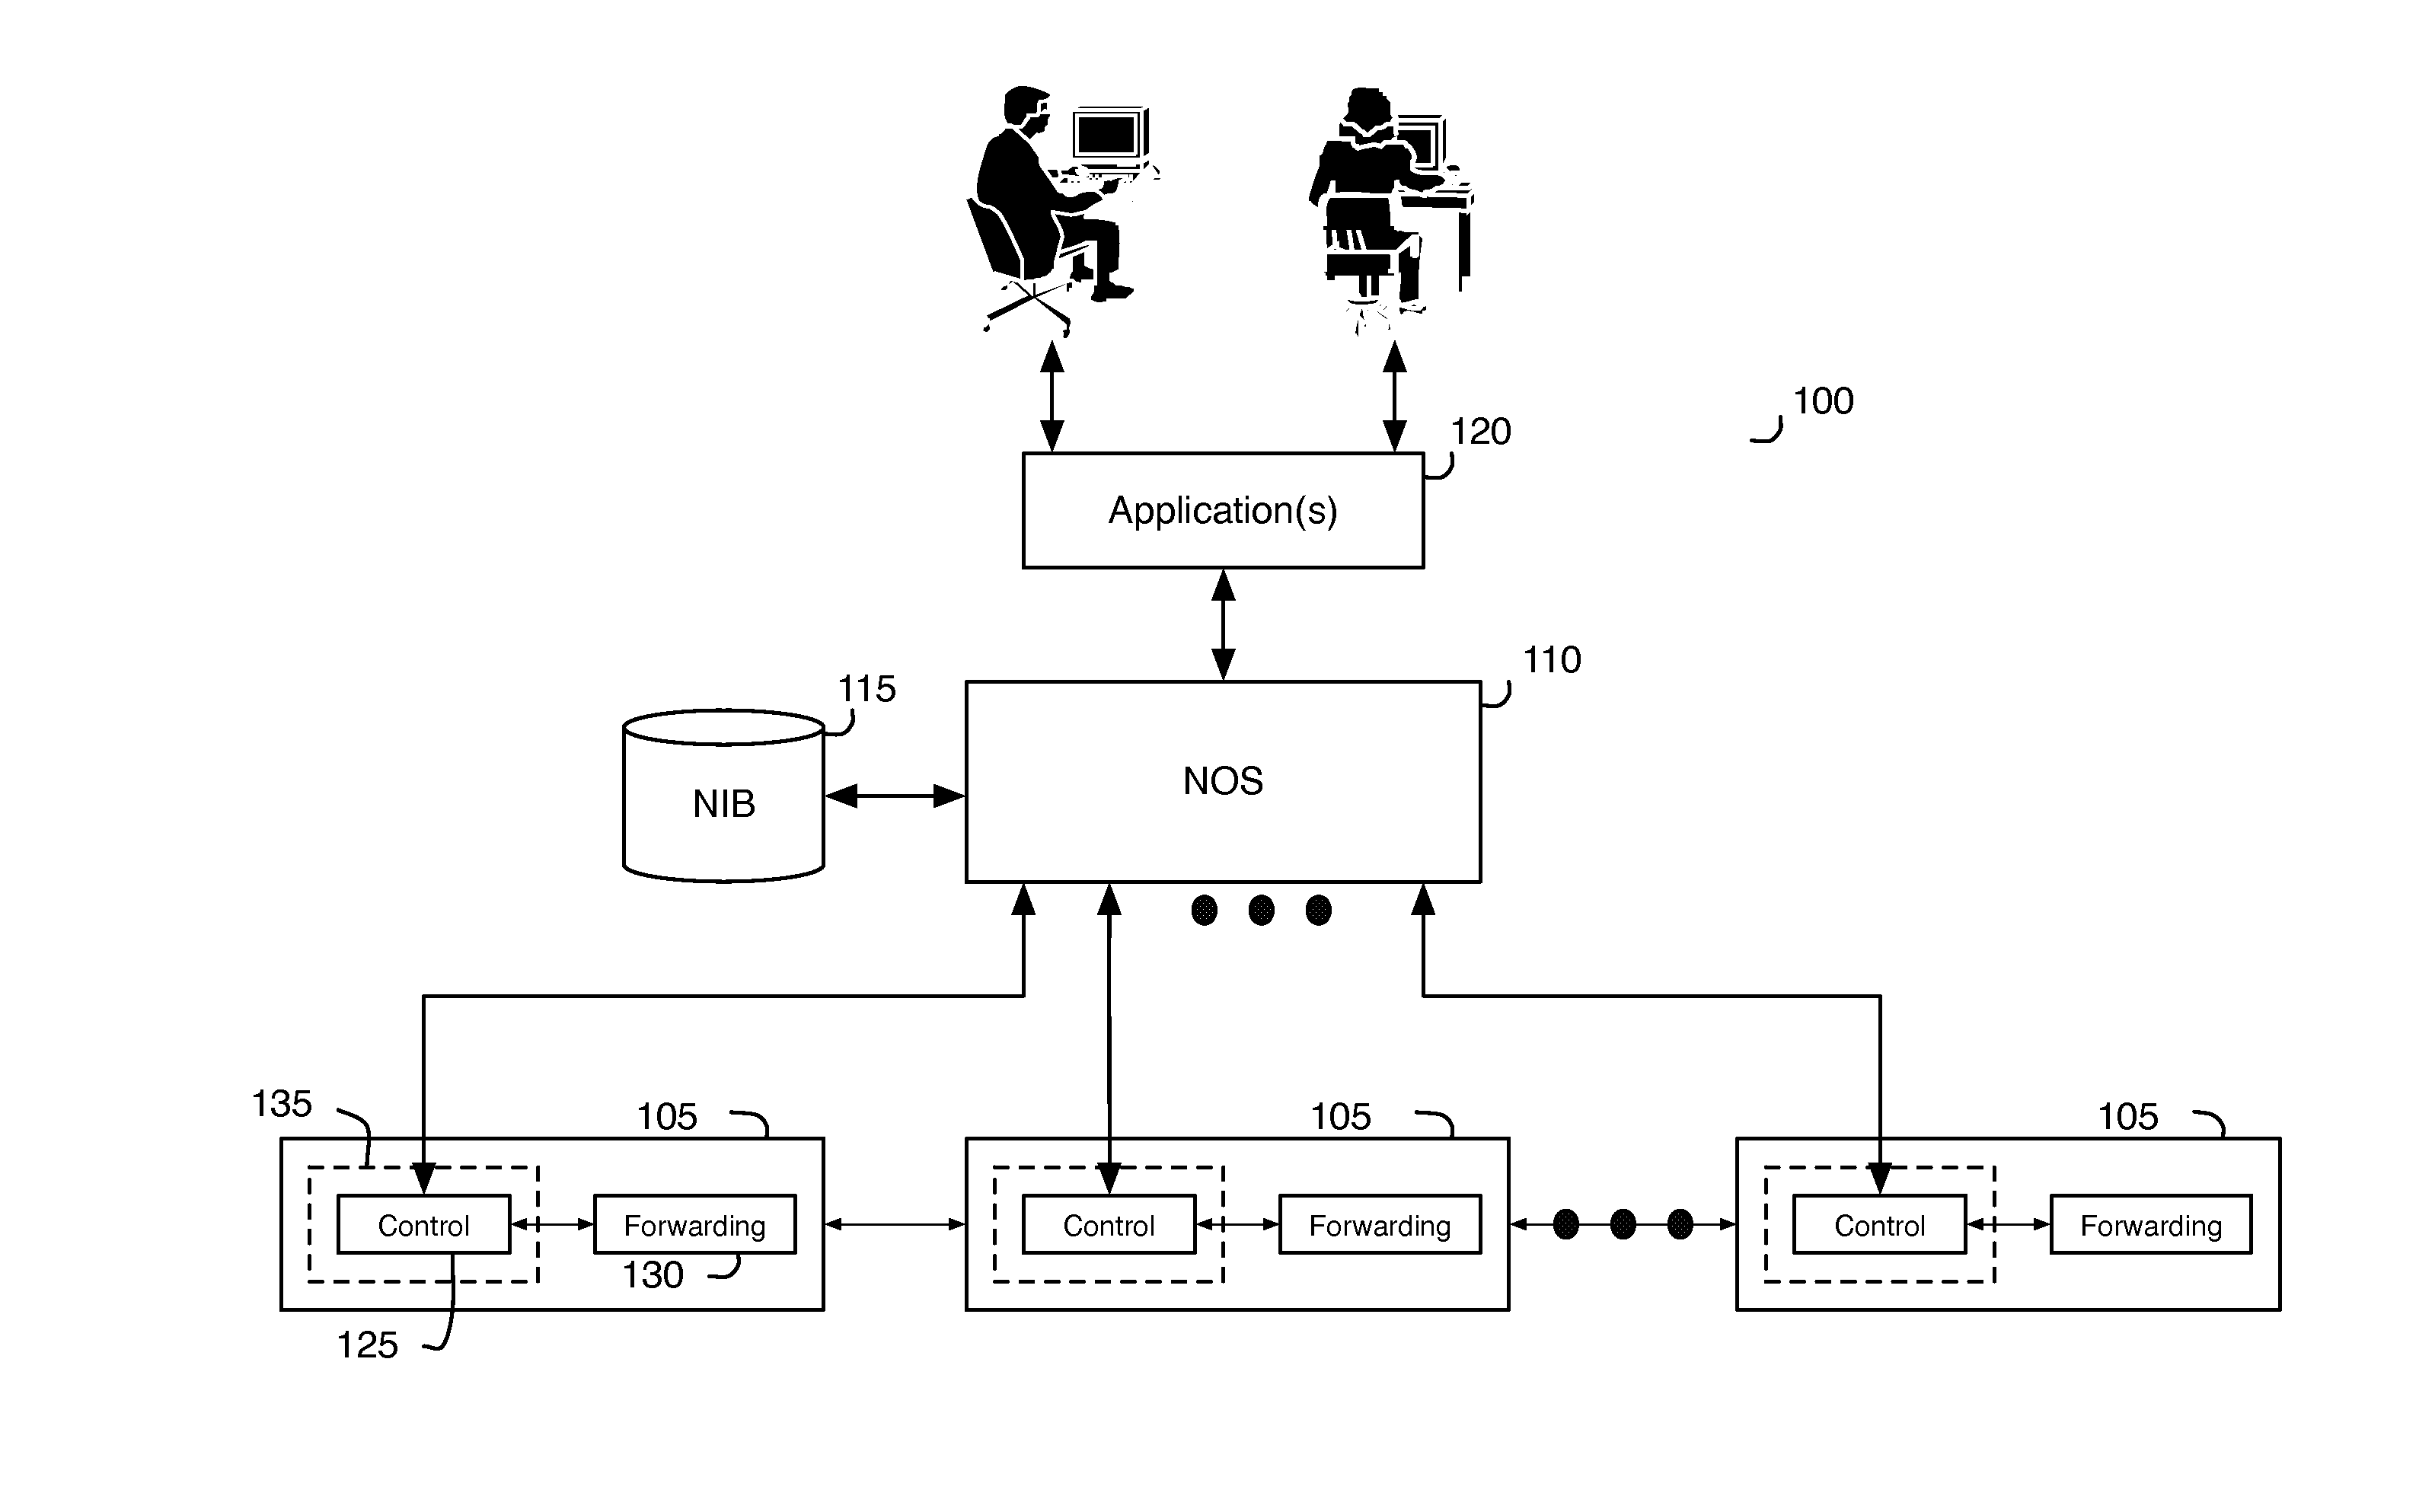 Network control apparatus and method with port security controls